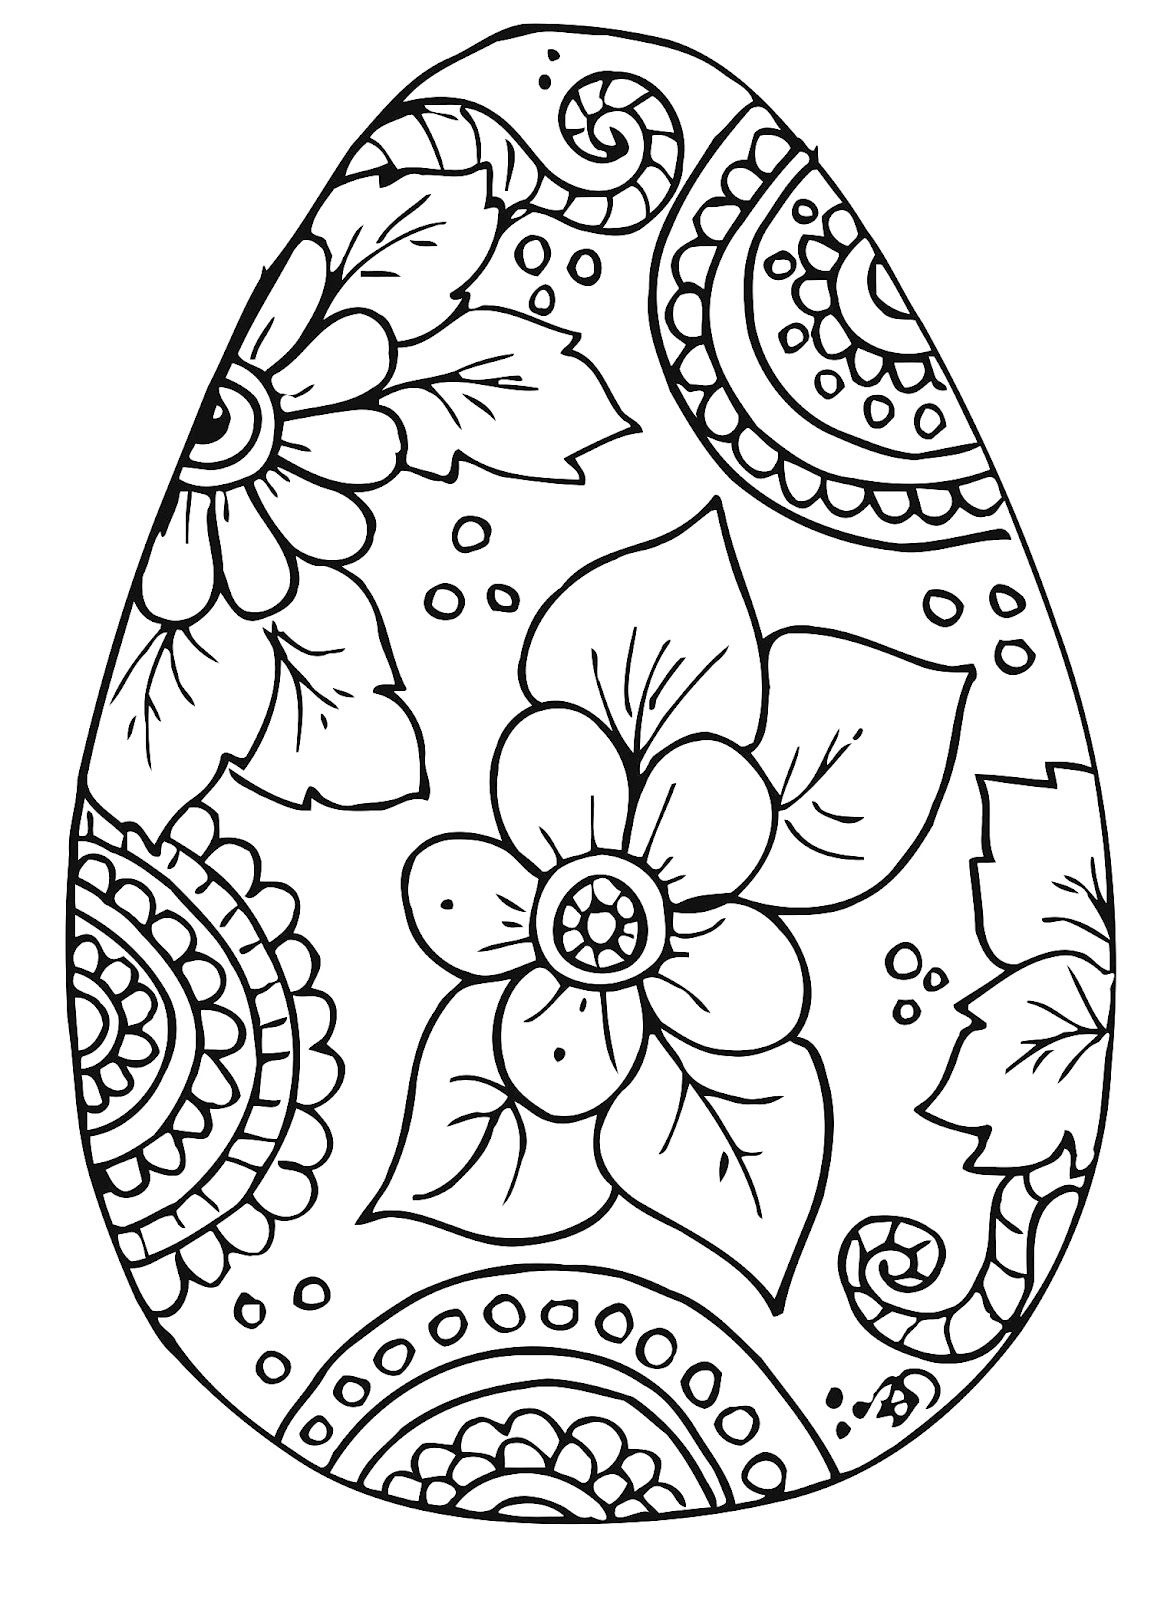 10 Cool Free Printable Easter Coloring Pages For Kids Who've Moved - Free Printable Easter Drawings